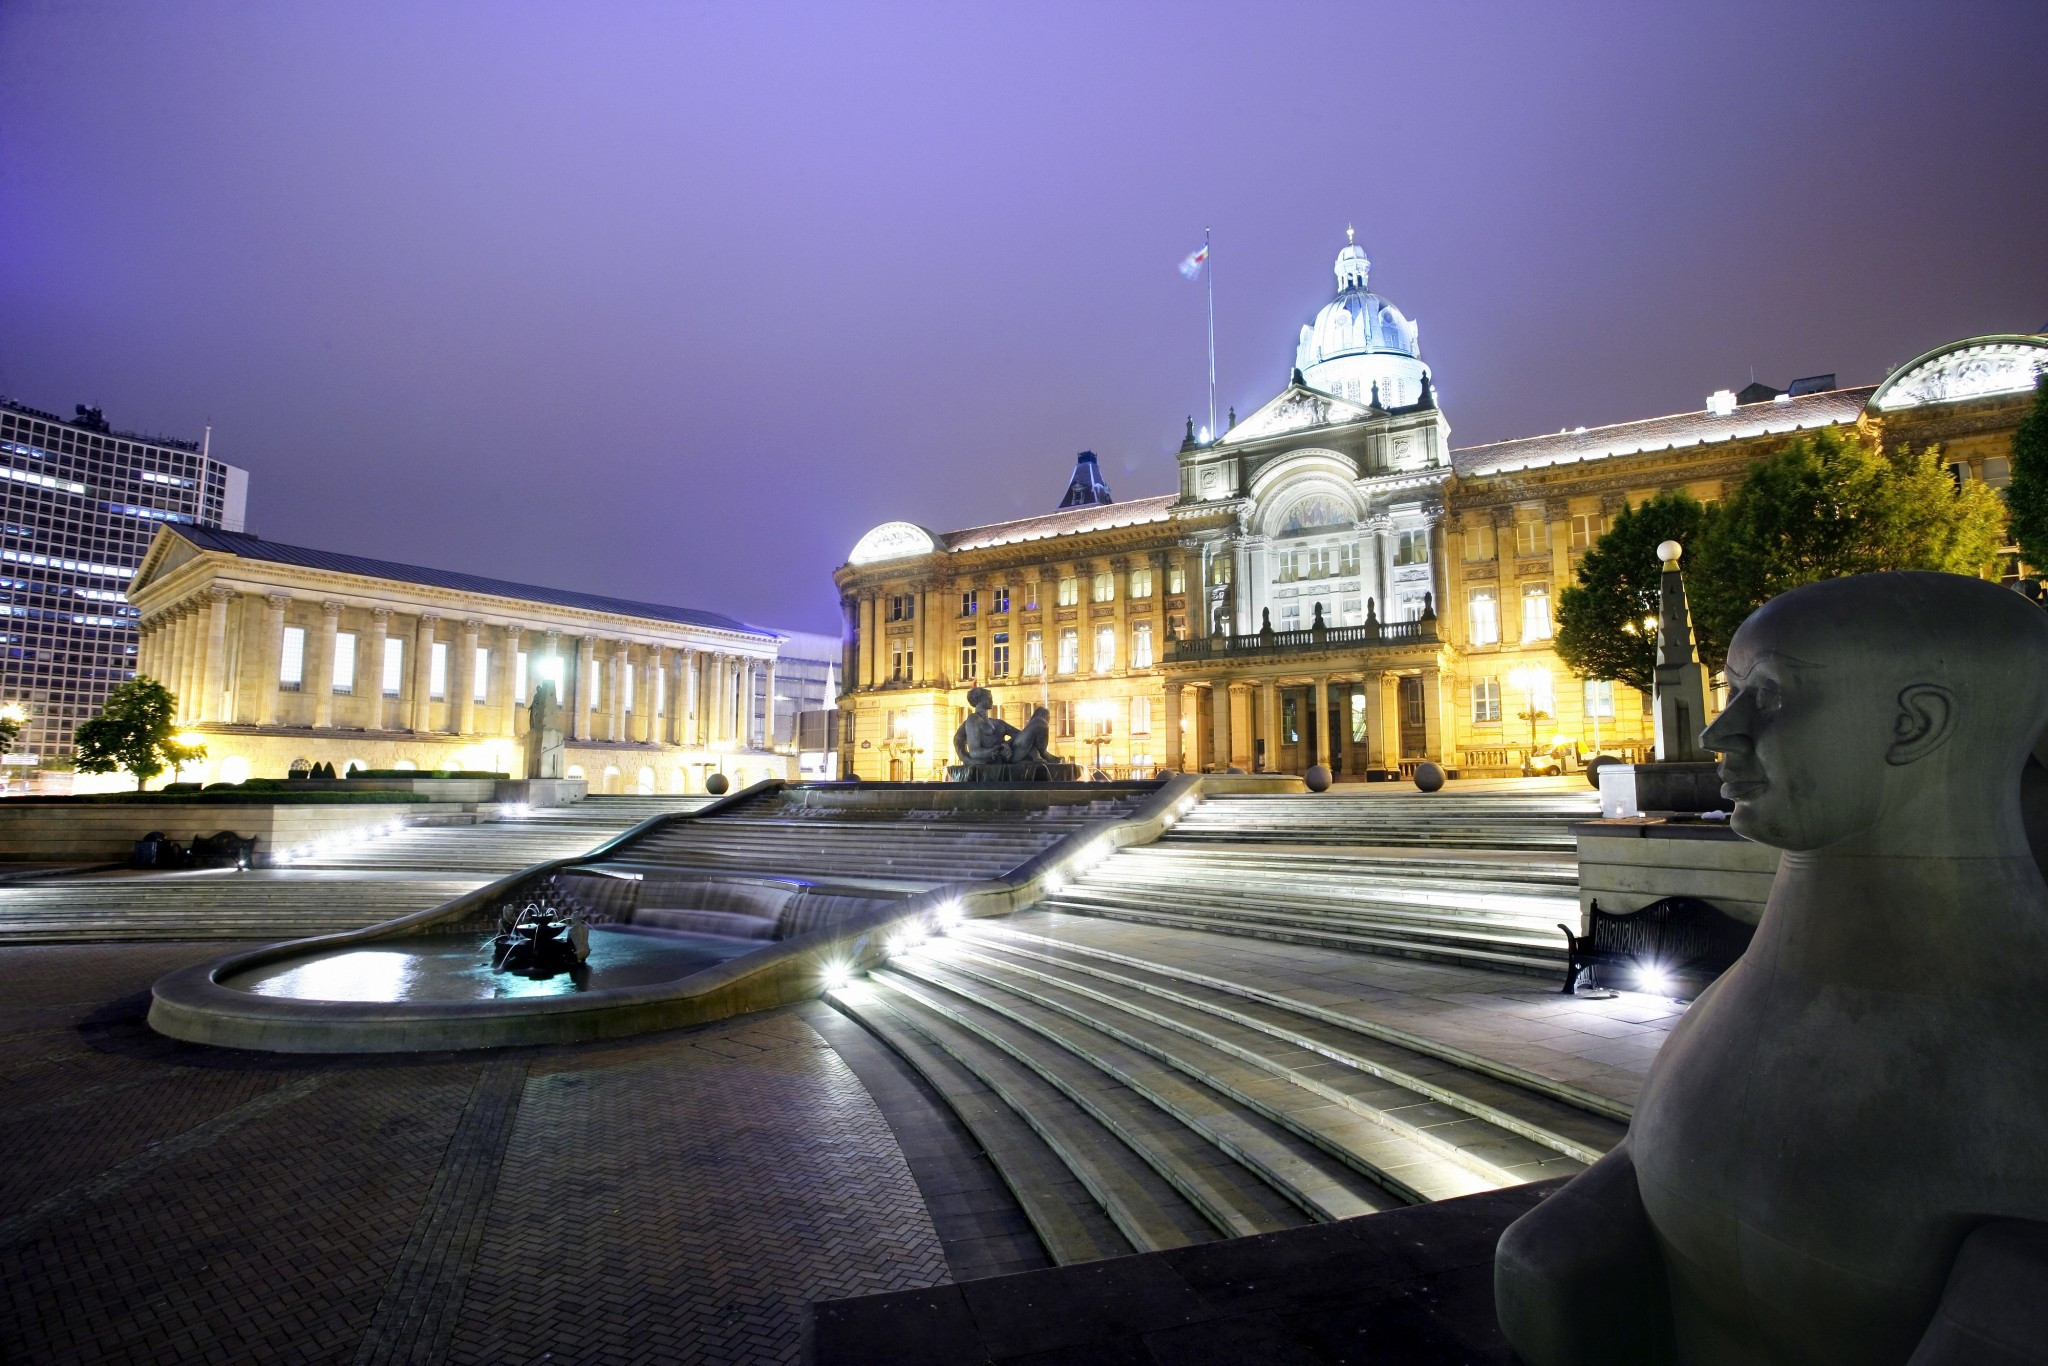 An urban festival would take place around the event at Victoria Square ©Birmingham 2022